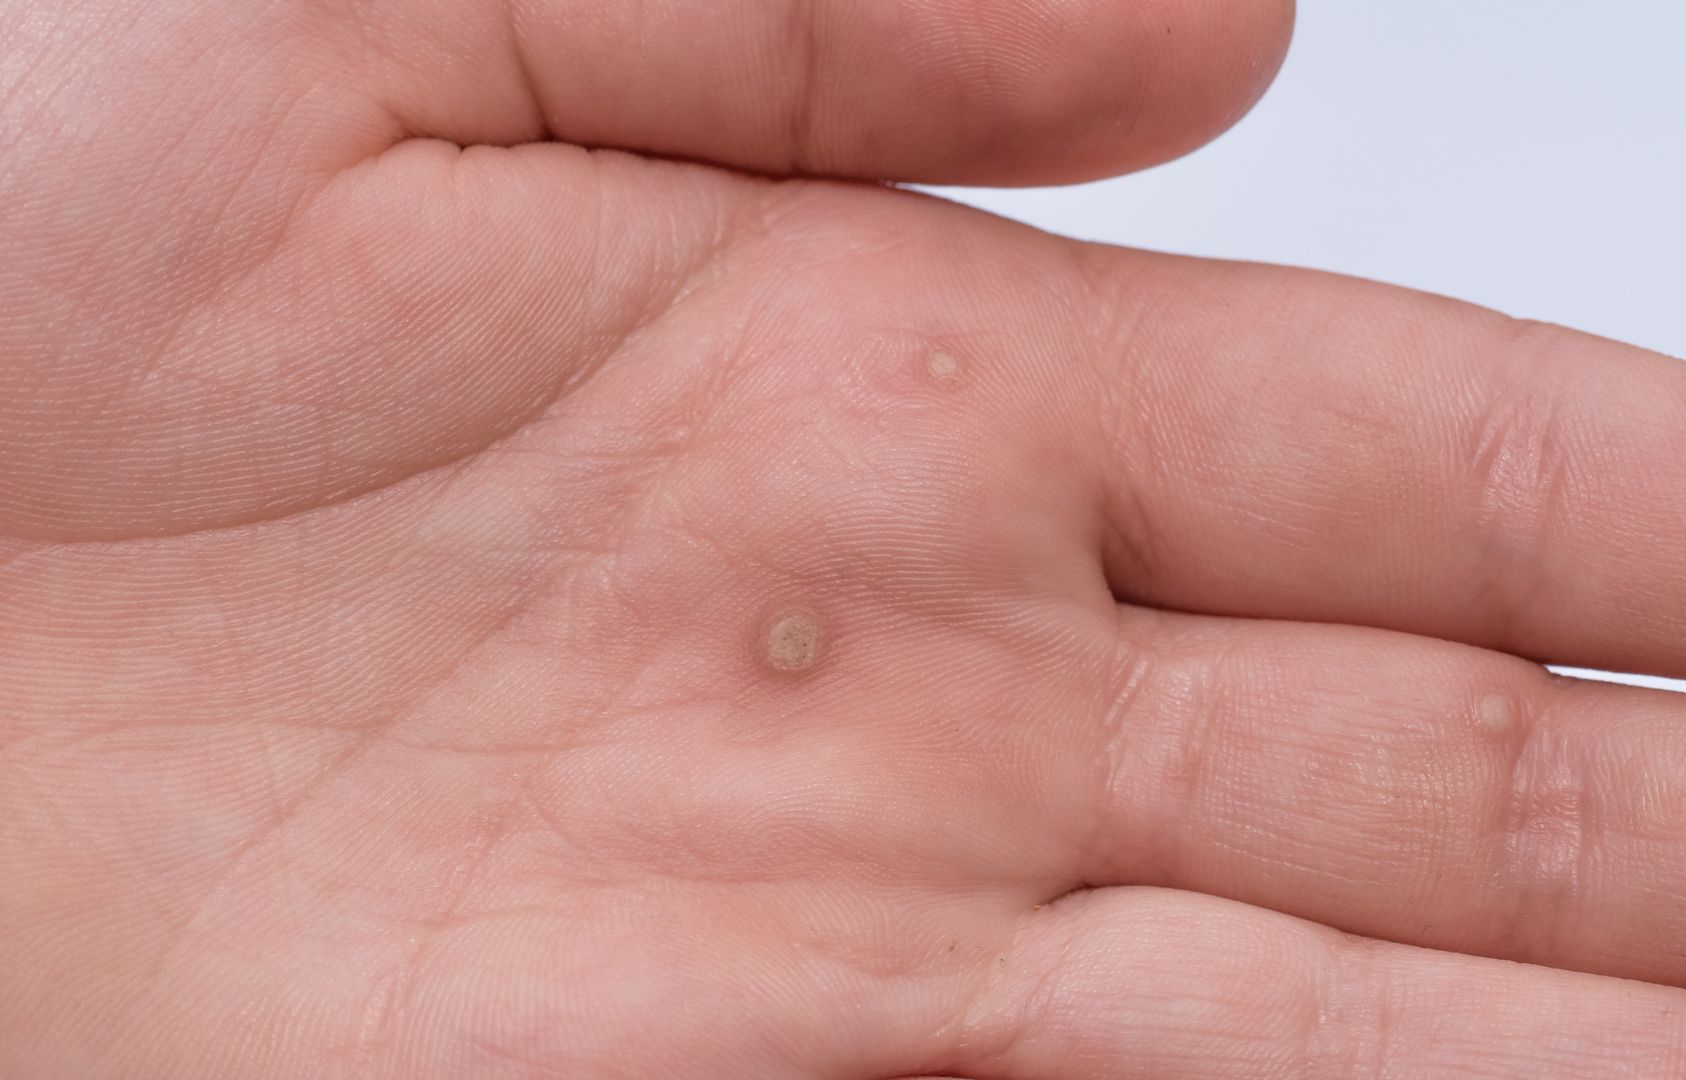 Hpv warts on fingers - What are Warts? (Verruca Vulgaris) hpv virus zyste Hpv warts on finger